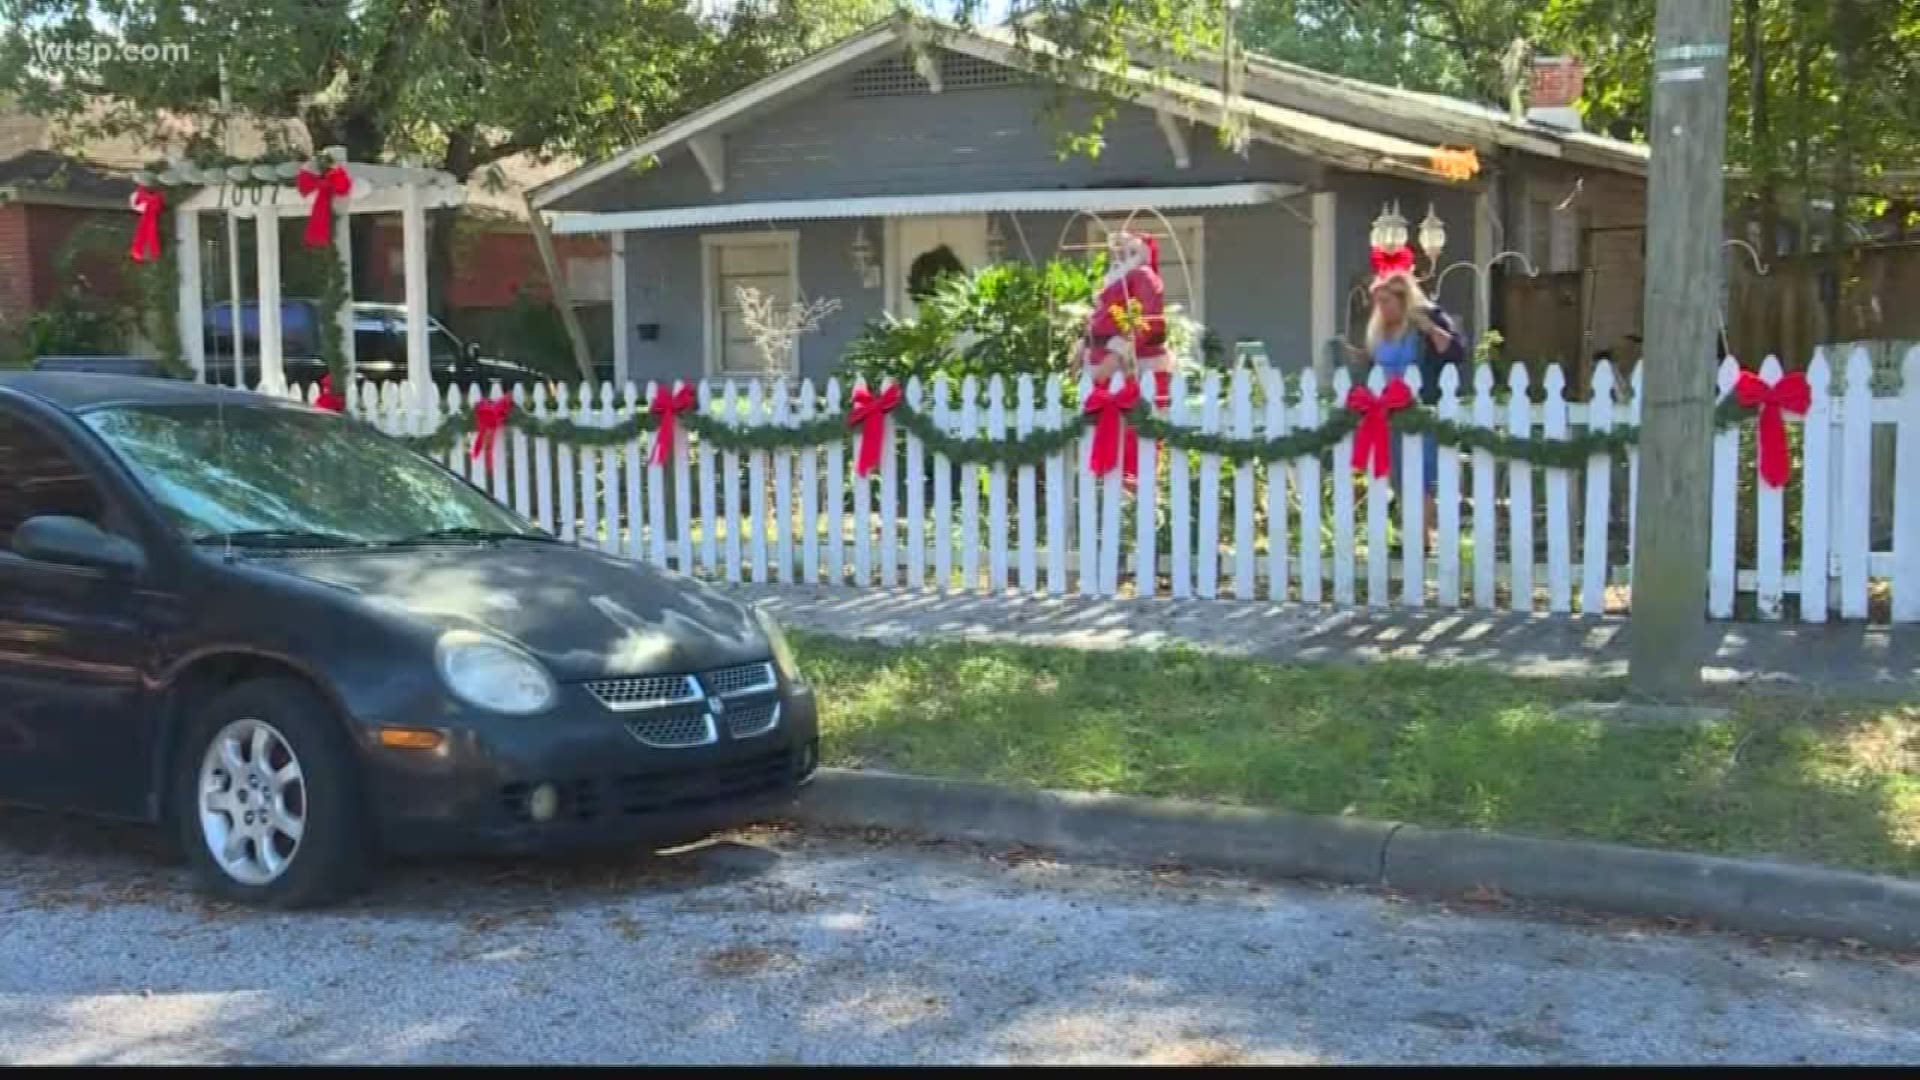 During a time of darkness in southeast Seminole Heights, there are people like Courtney Bumgarnar who are helping make the area much more brighter this holiday season.